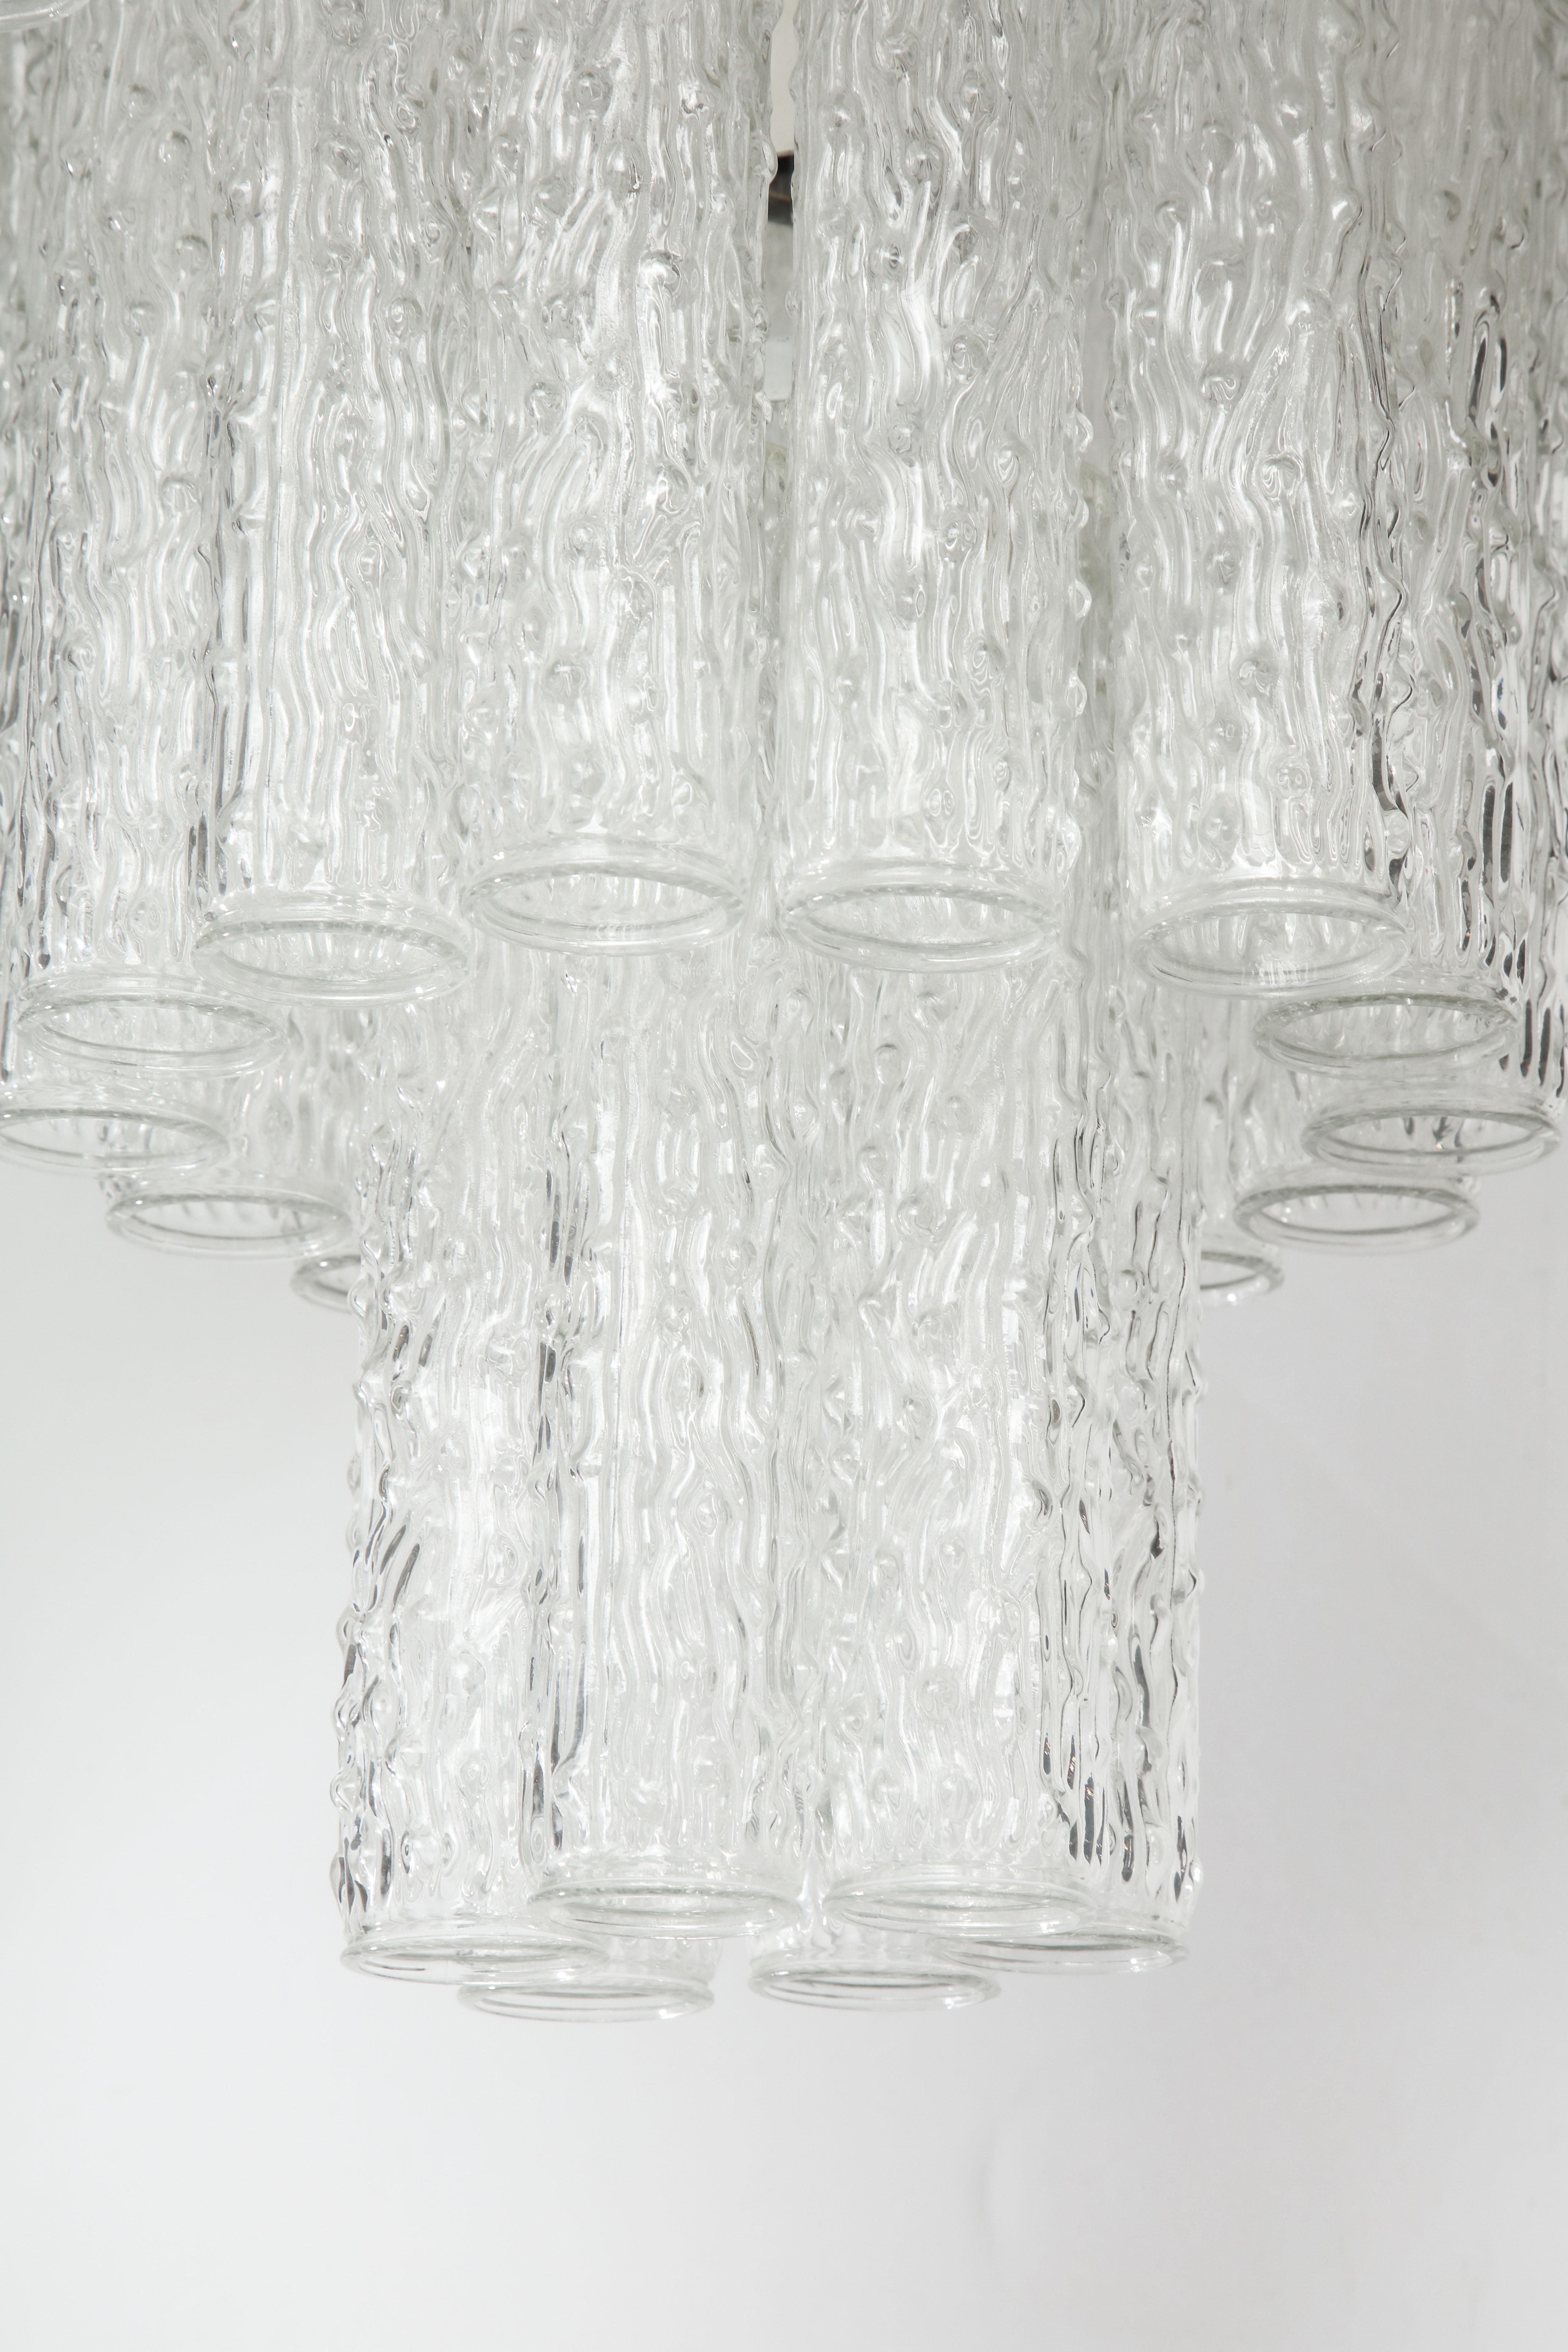 A three-tier chandelier handcrafted in Italy. The piece is made up of a metal frame that supports three tiers of round, clear glass tube crystals. A beautiful way to light up a room!